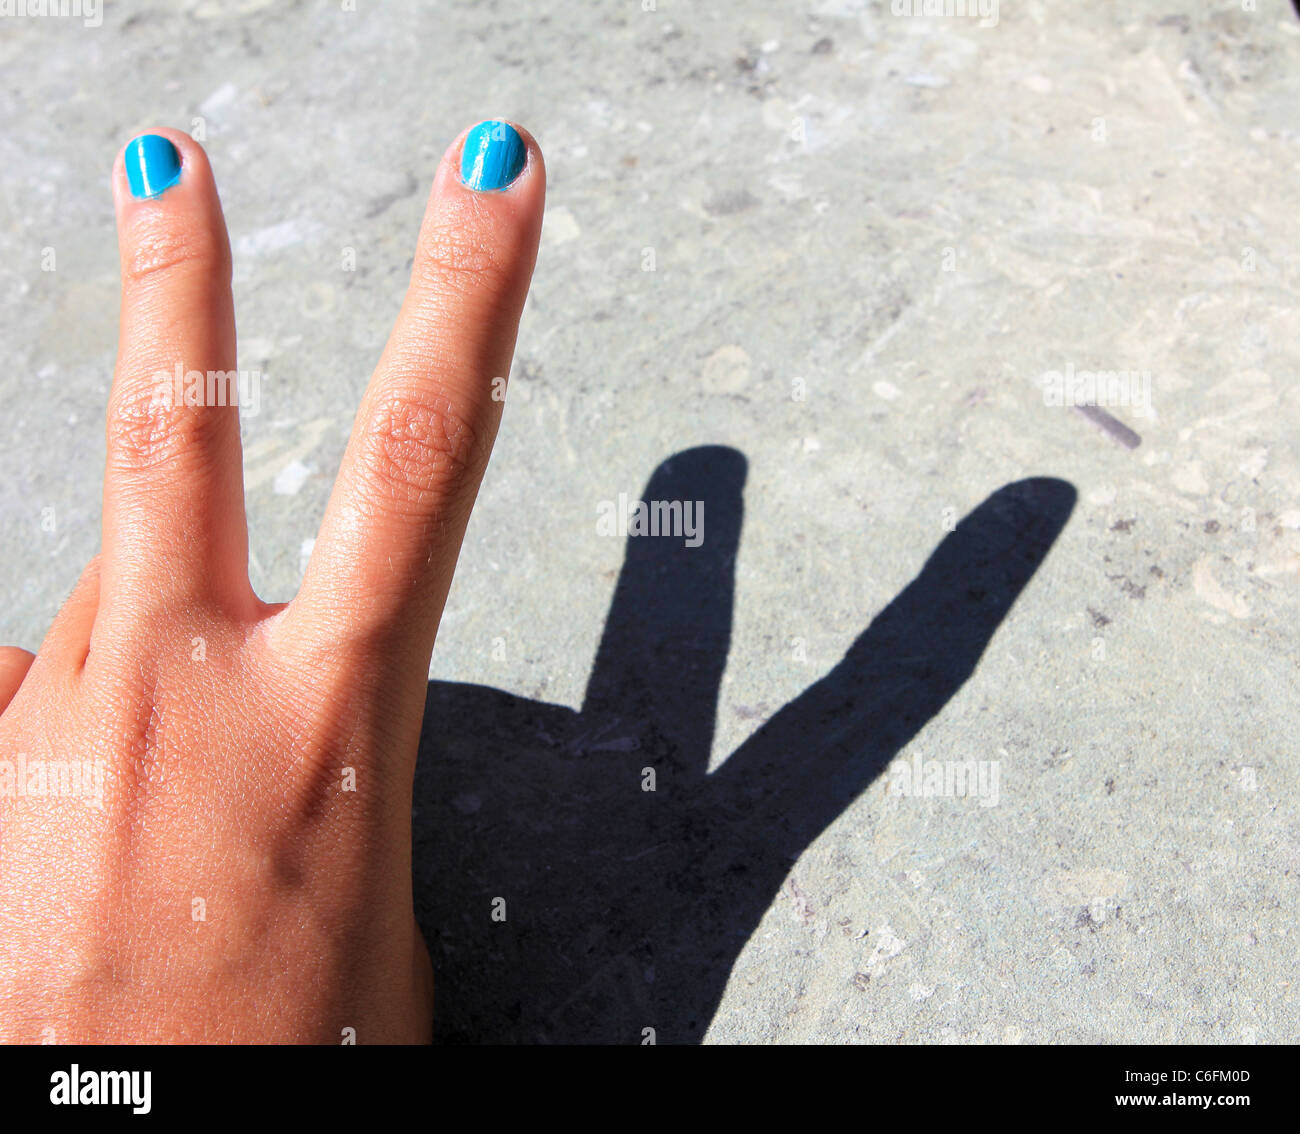 Concept for victory sign made with hand and shadow Stock Photo